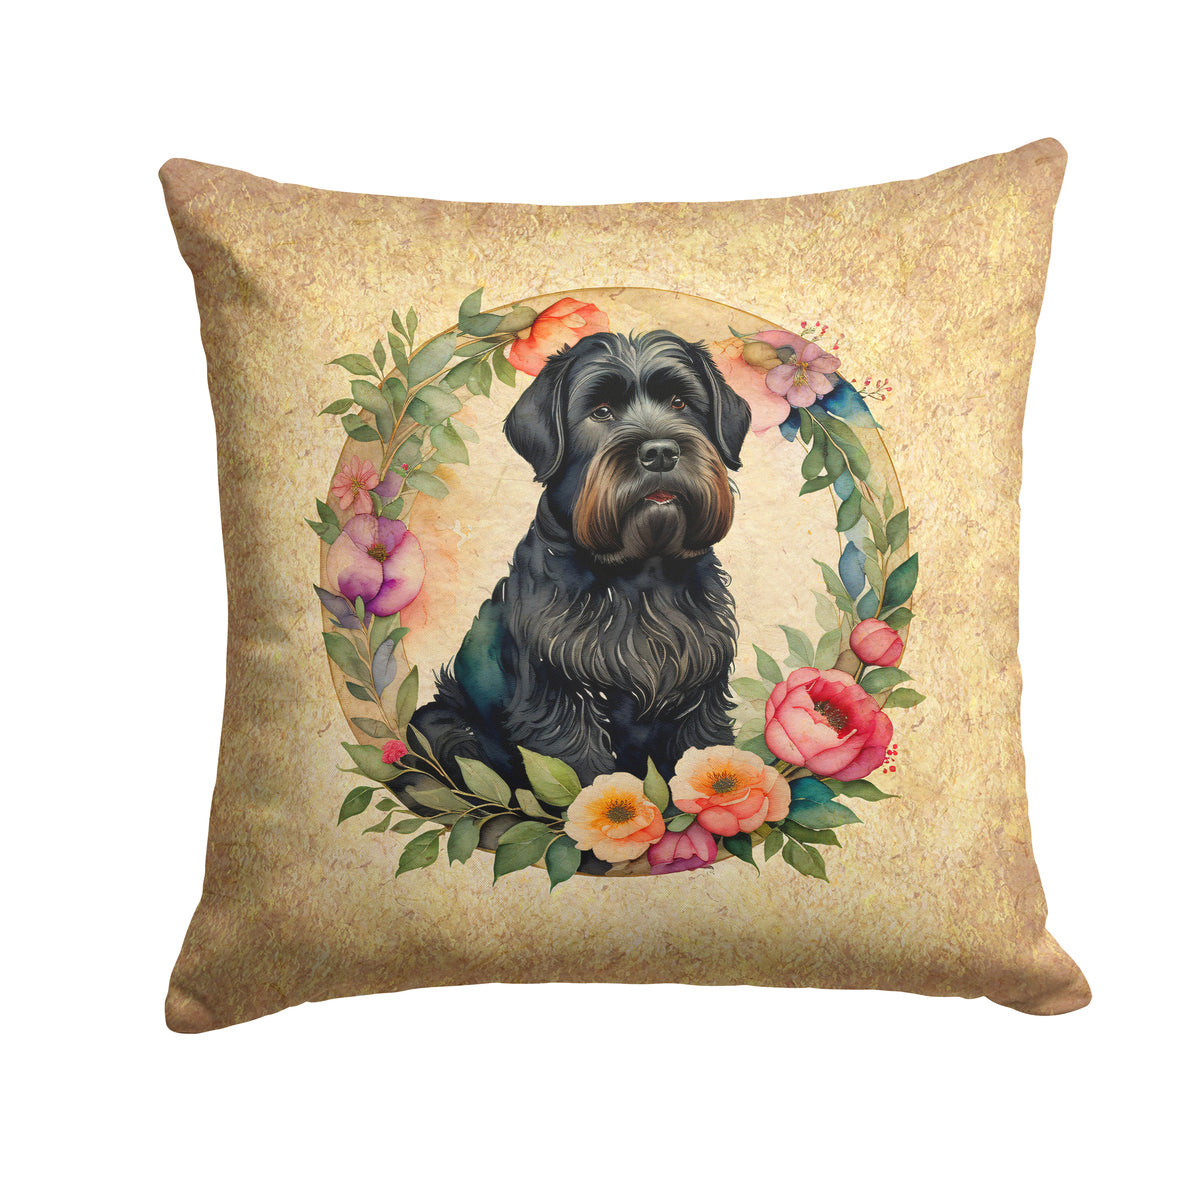 Buy this Black Russian Terrier and Flowers Fabric Decorative Pillow